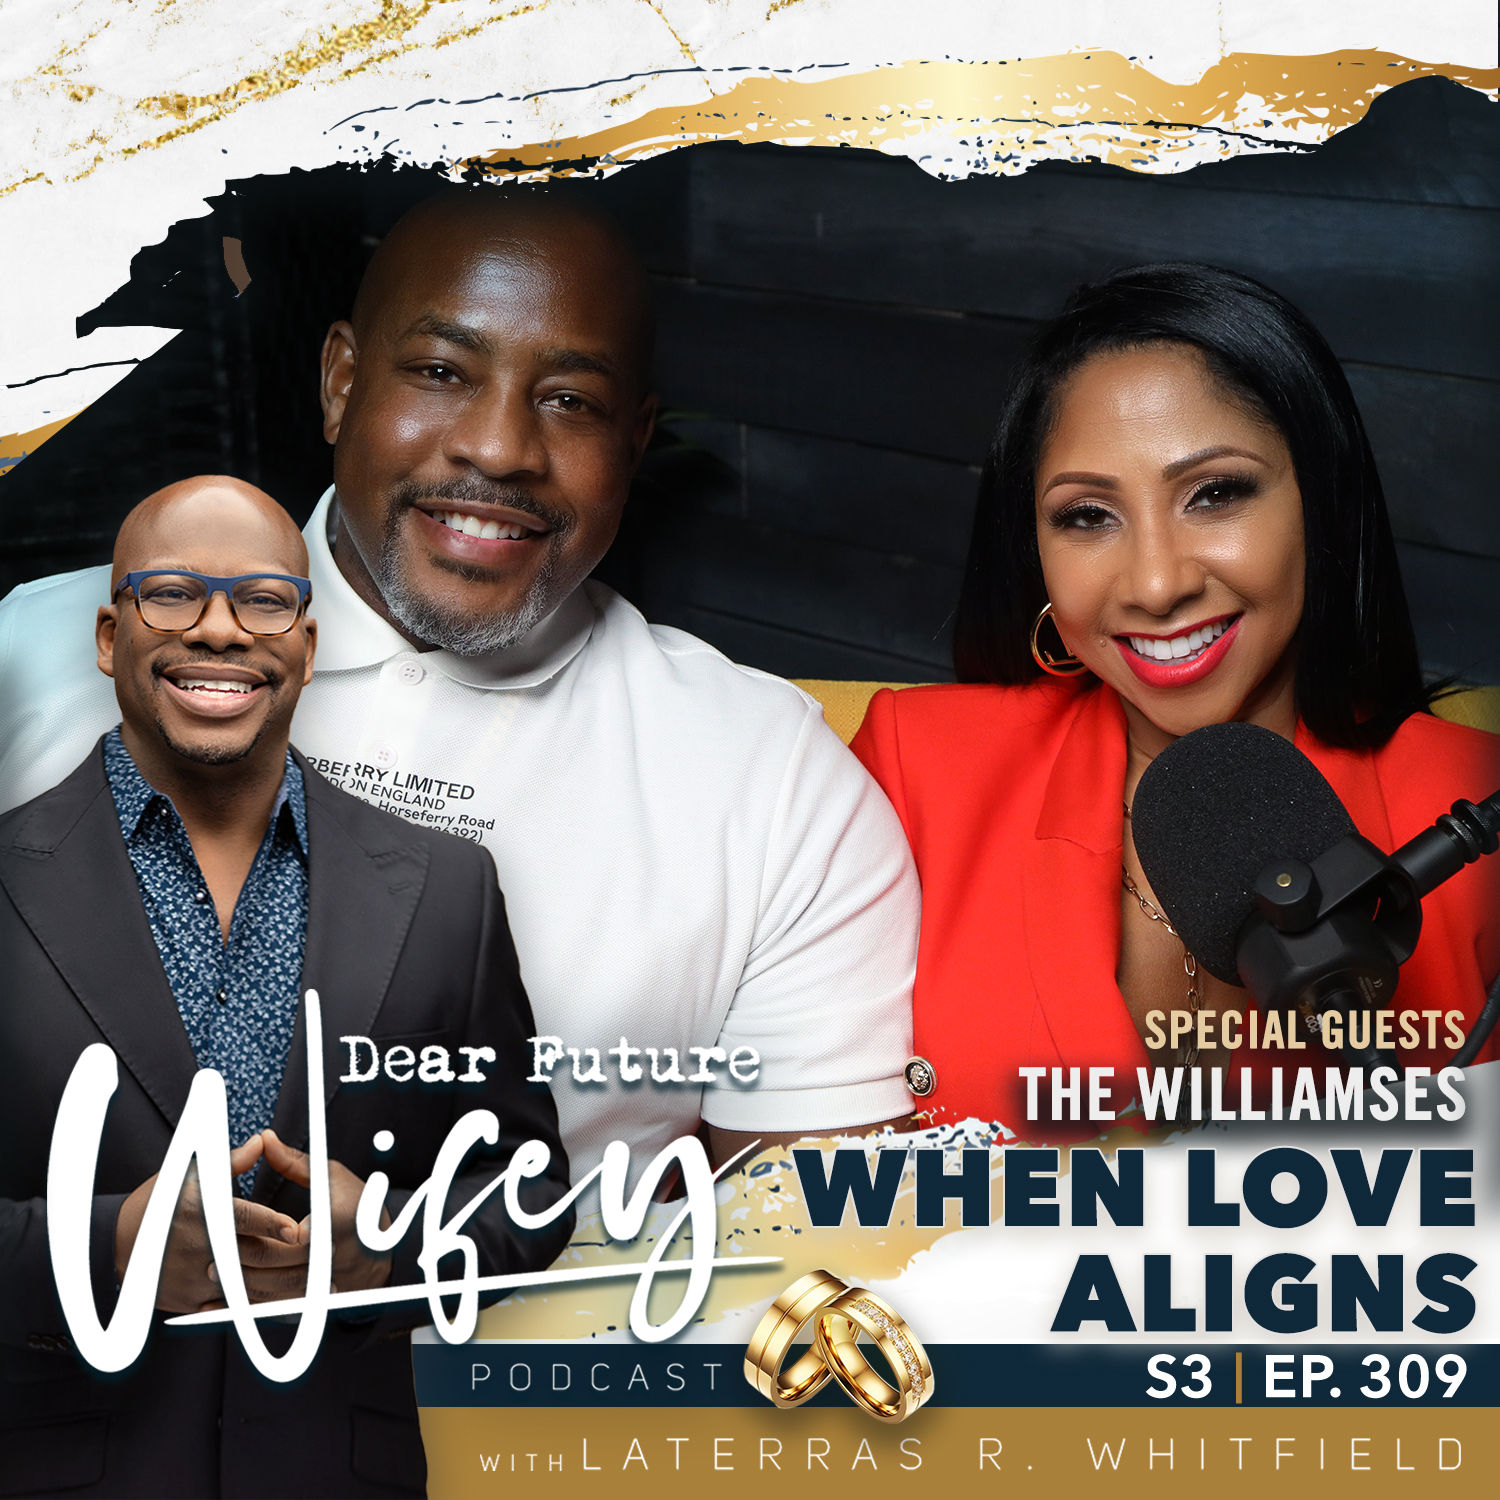 When Love Aligns (Guests: The Williamses)